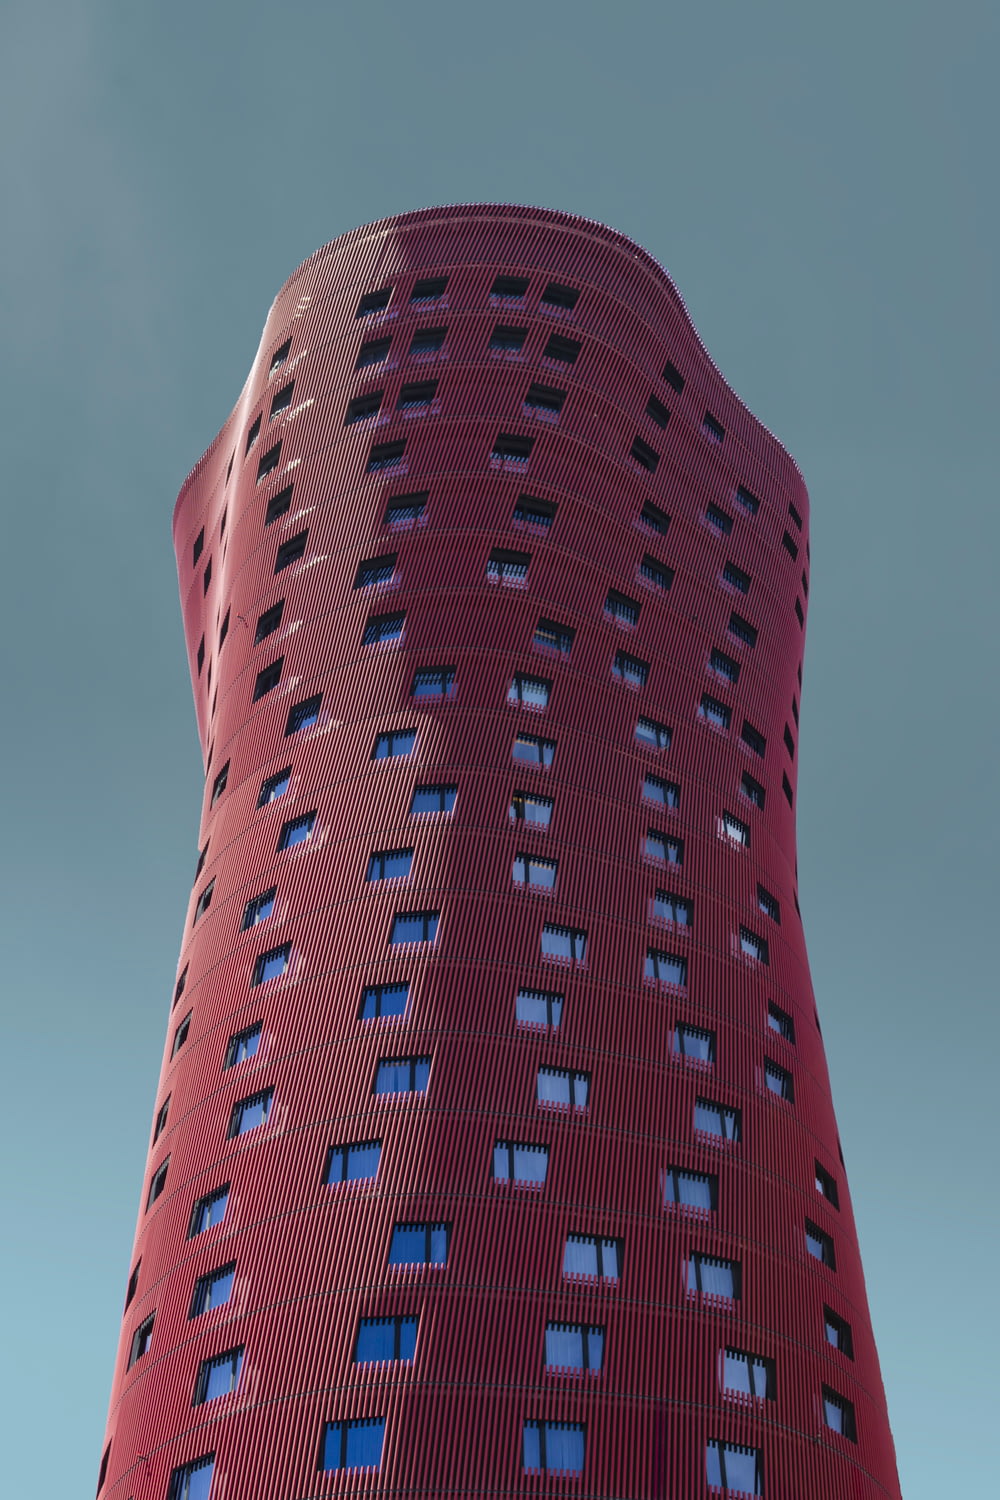 tall red building